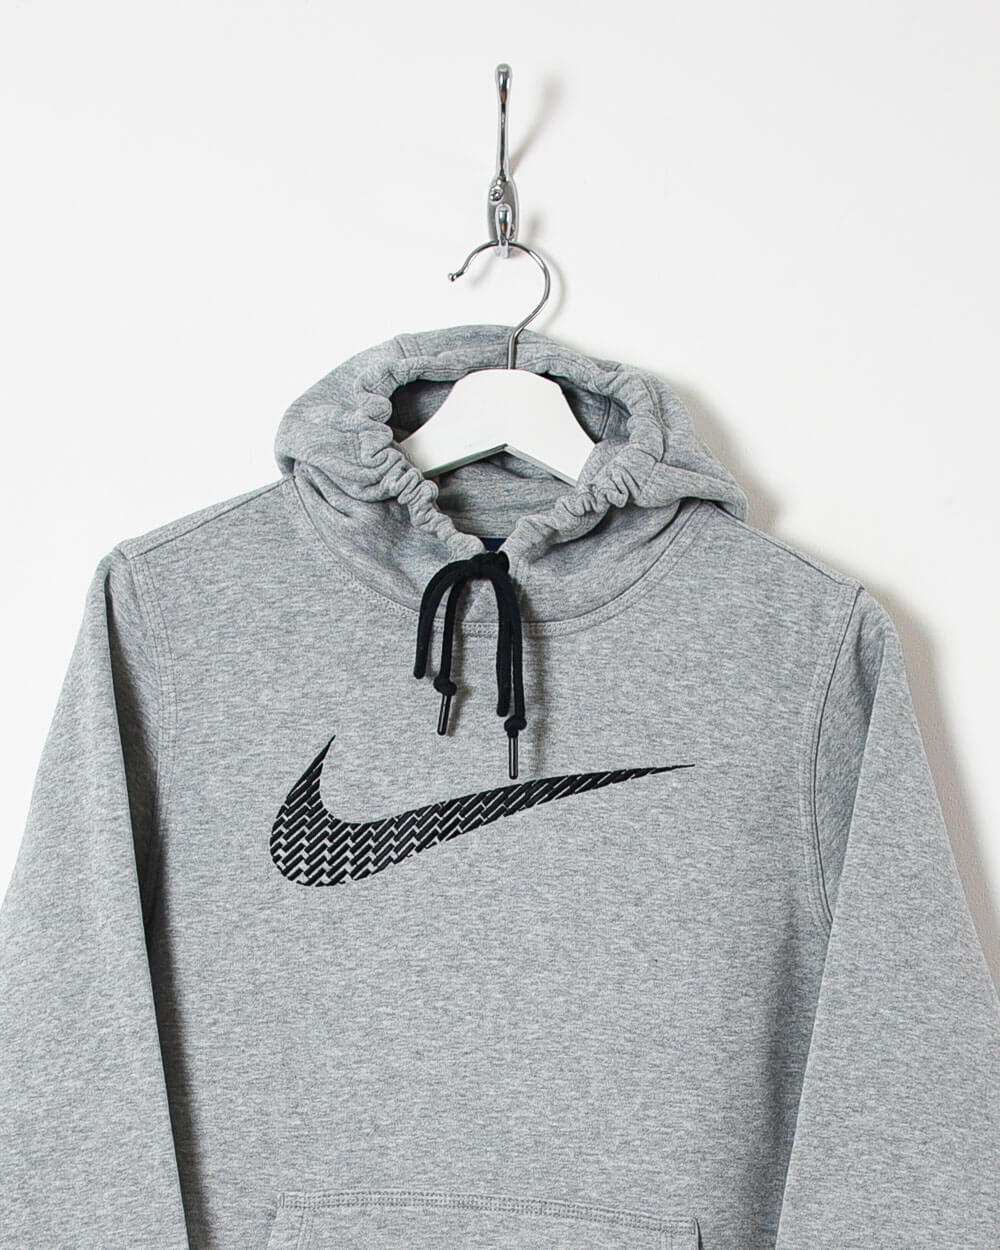 Nike Hoodie - X-Small - Domno Vintage 90s, 80s, 00s Retro and Vintage Clothing 